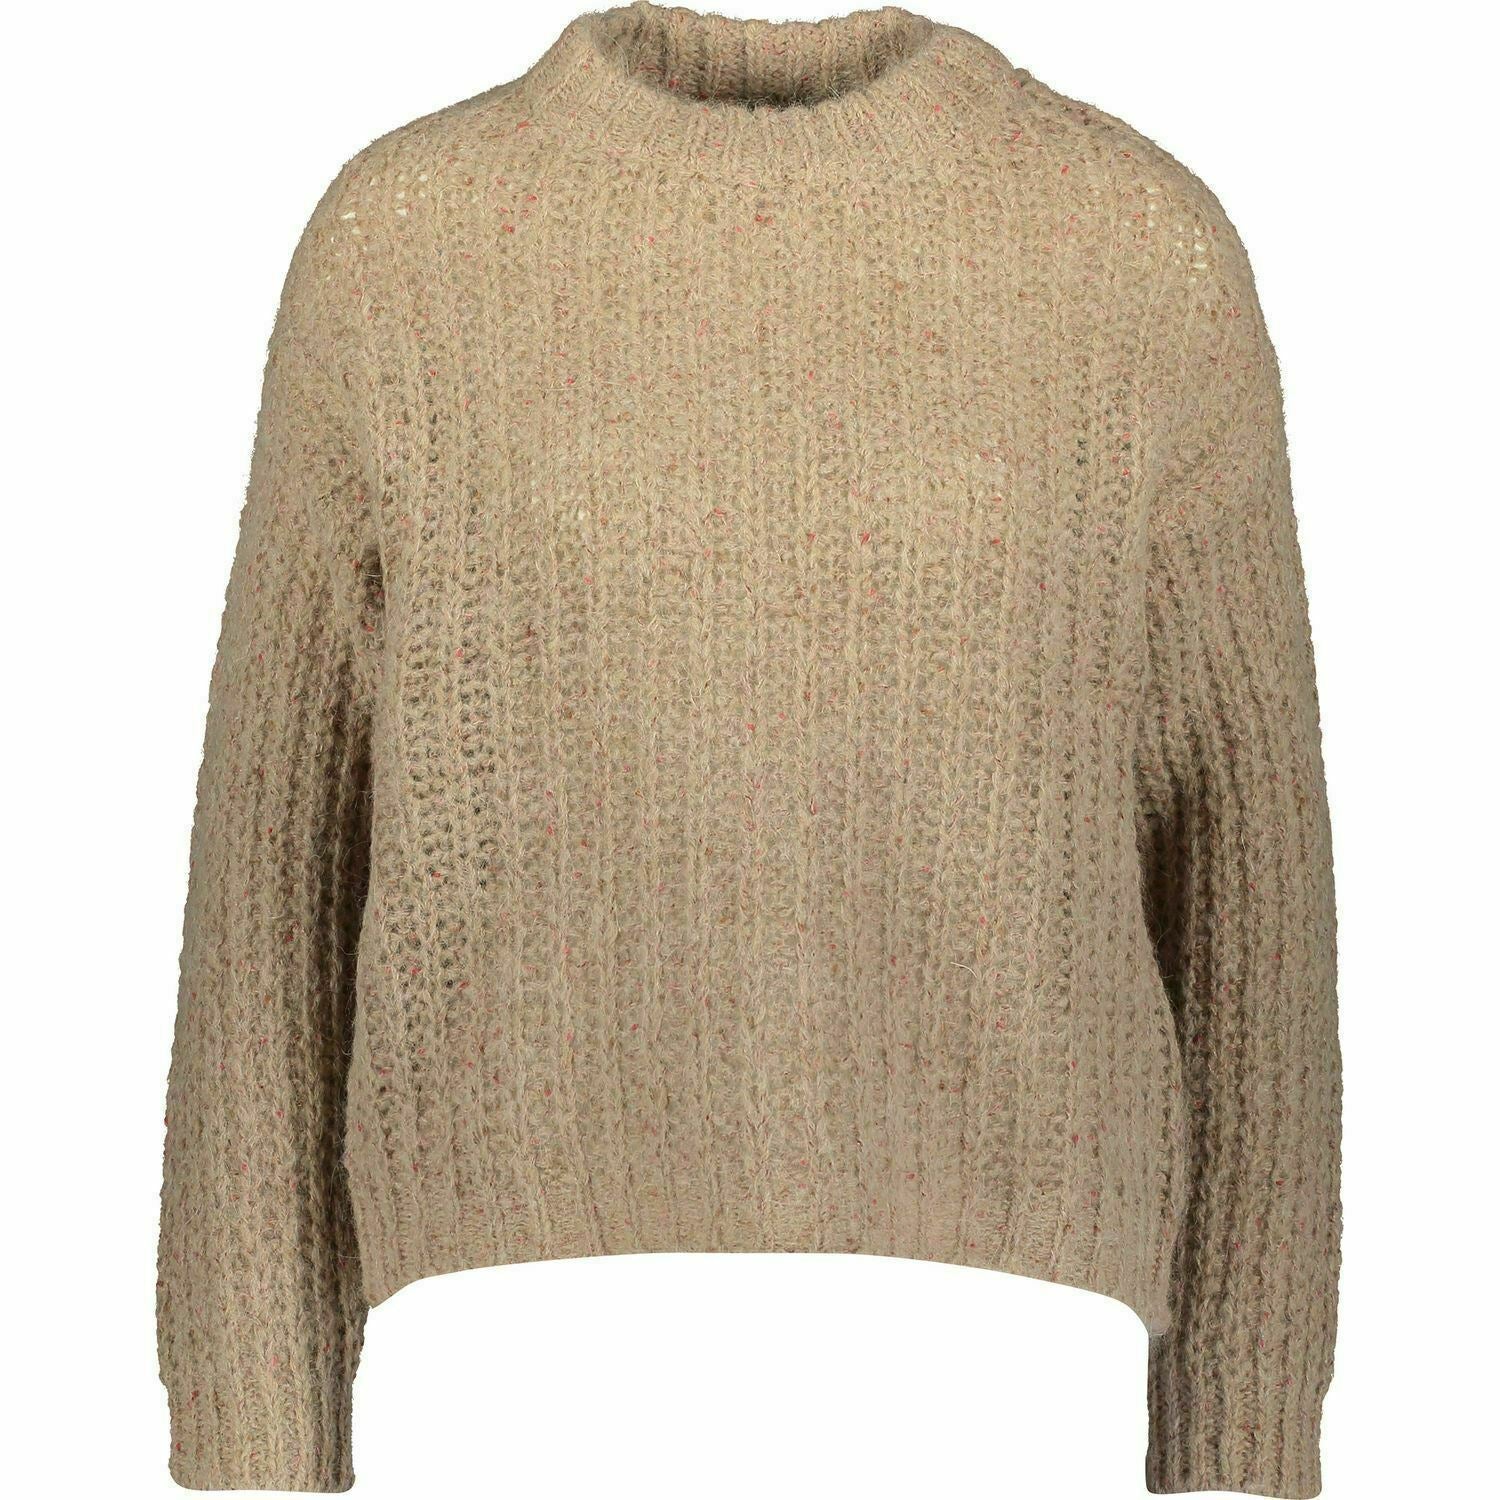 BARTOLINI Women's Knitted Cropped Jumper, Brown with Pink Speckles, size M